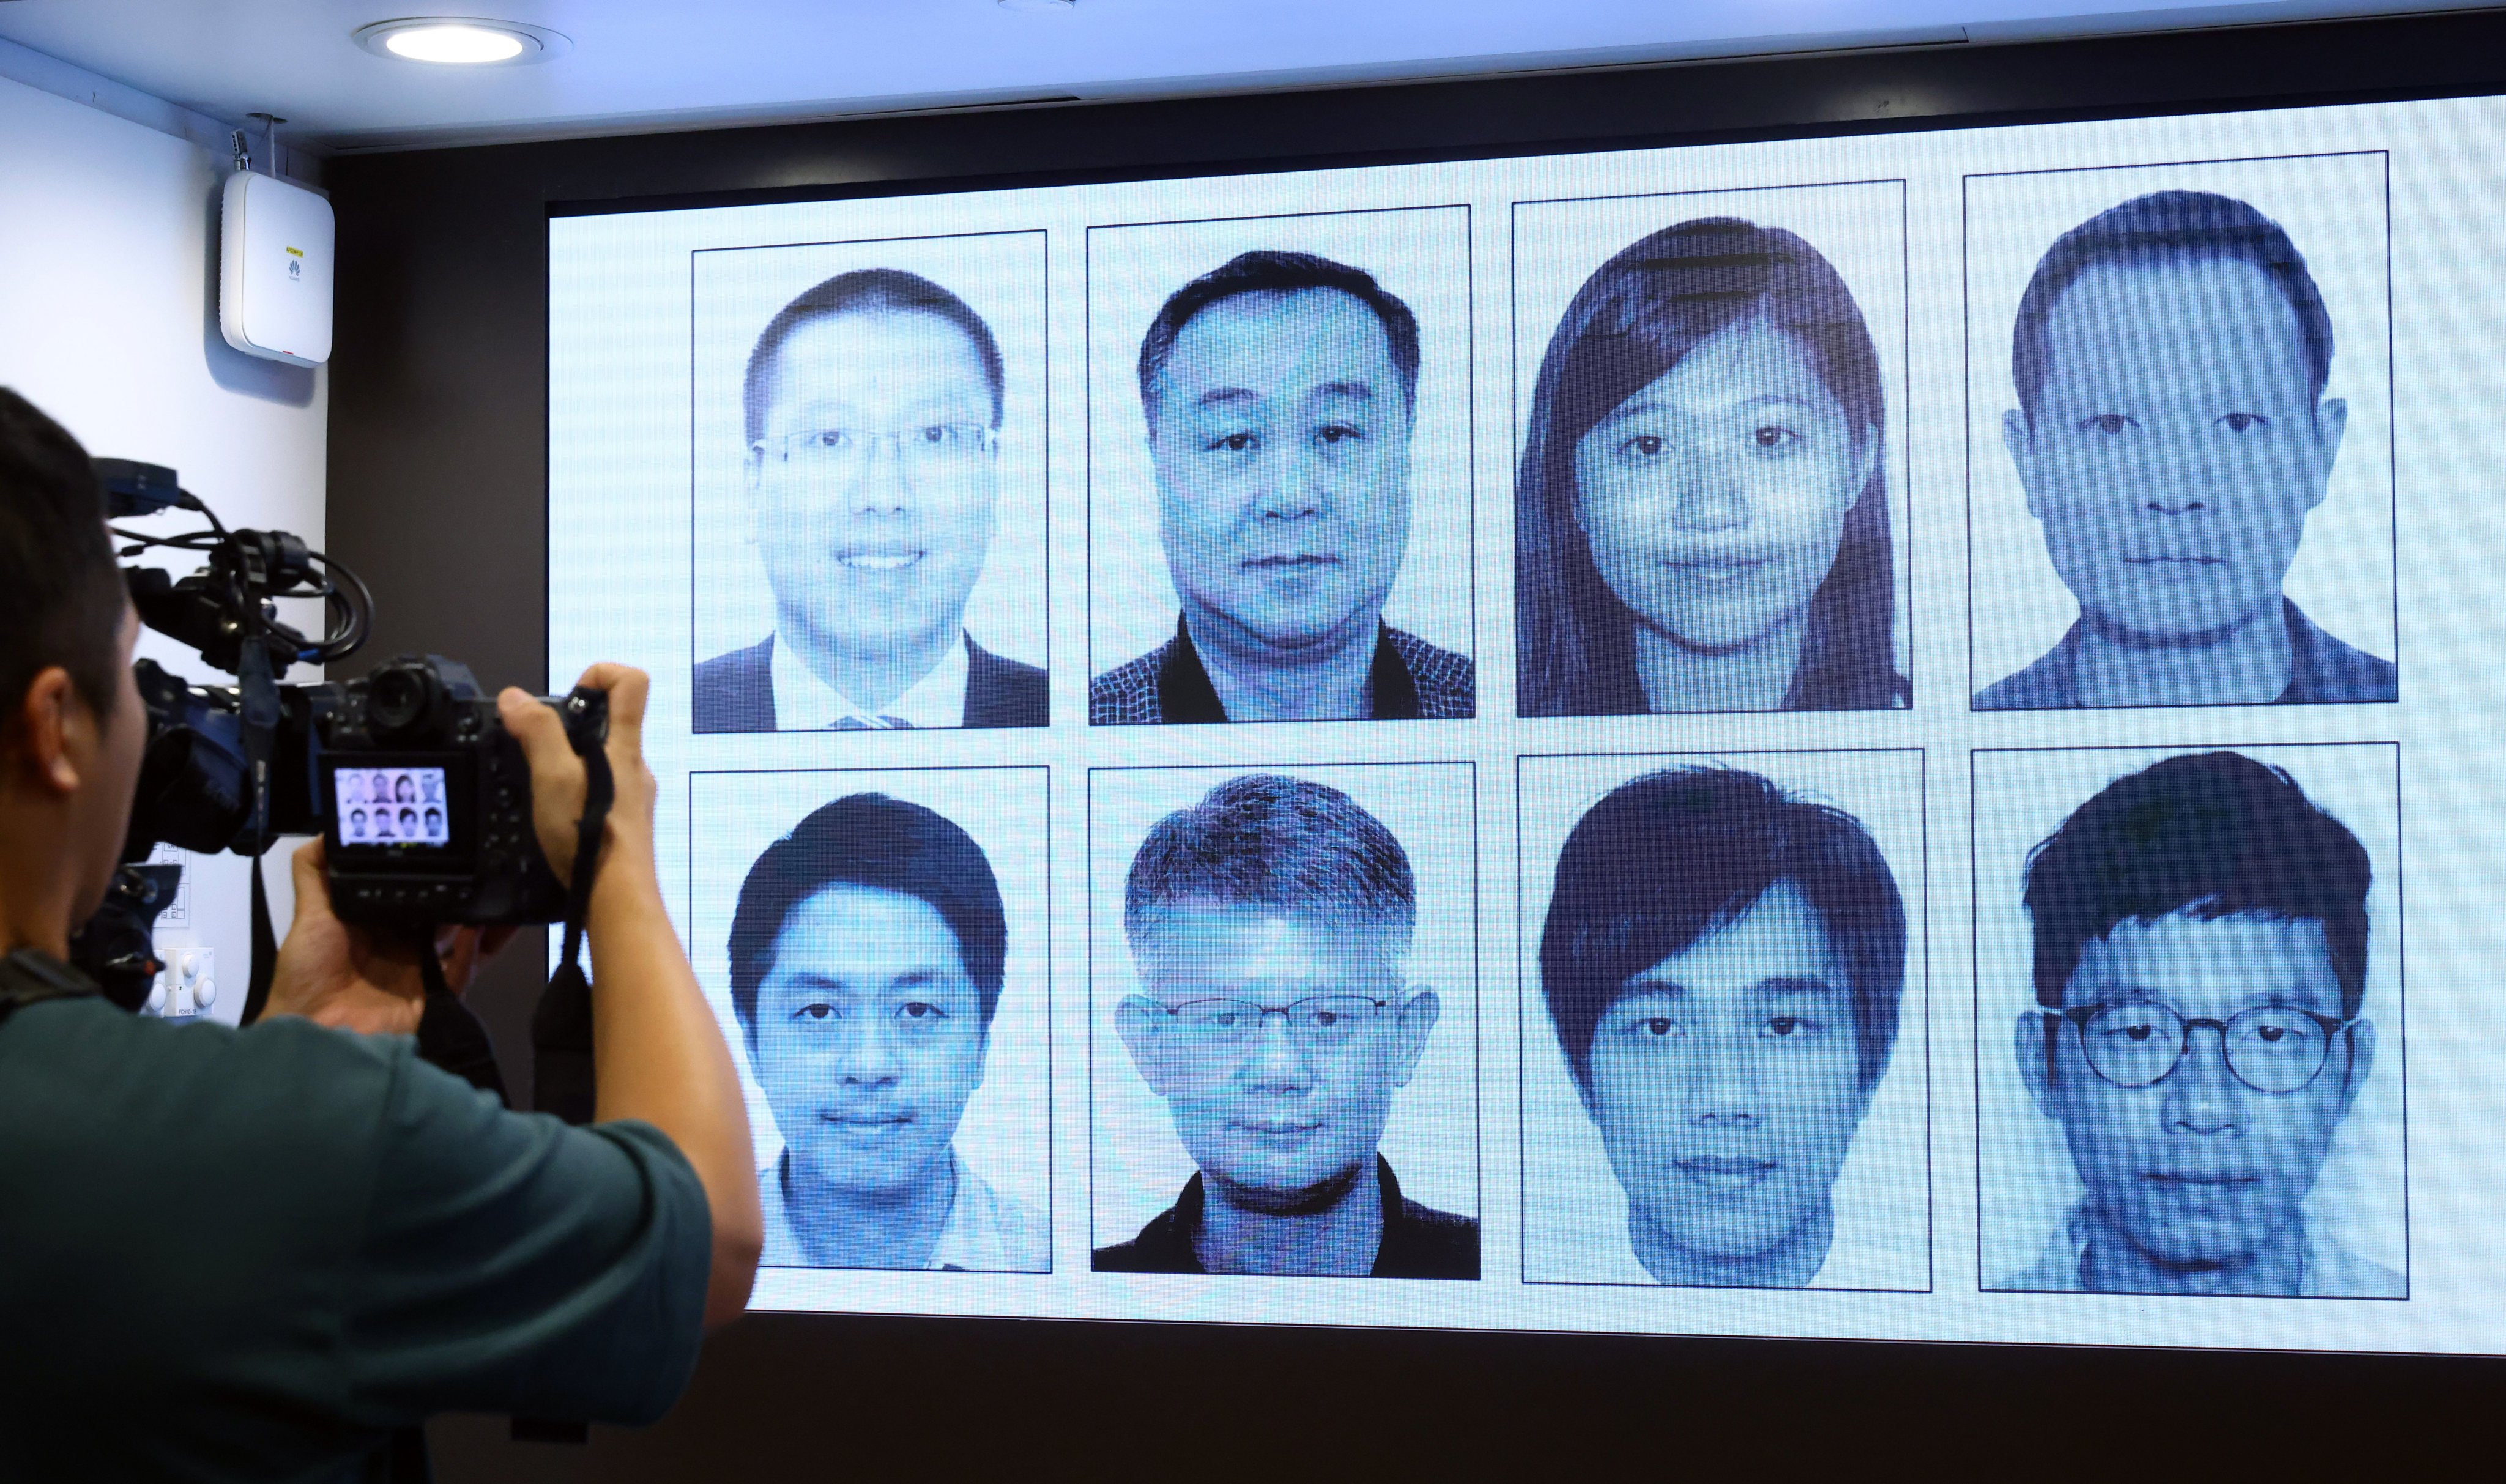 Sources say dozens of people are on police wanted list for national security offences after prices put on heads of eight alleged offenders. Photo: Dickson Lee